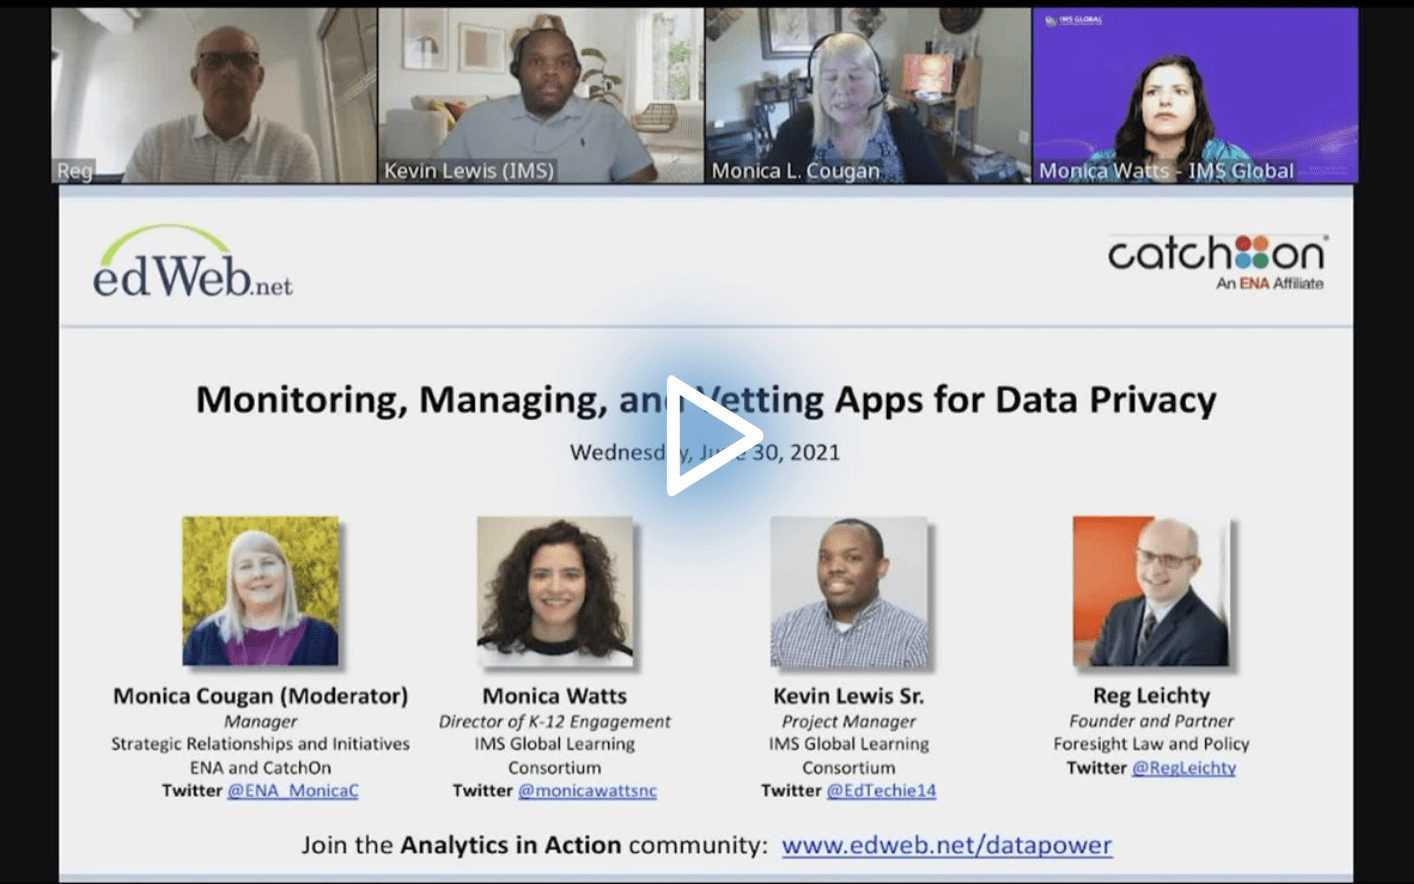 Monitoring, Managing, and Vetting Apps for Data Privacy edLeader Panel recording link